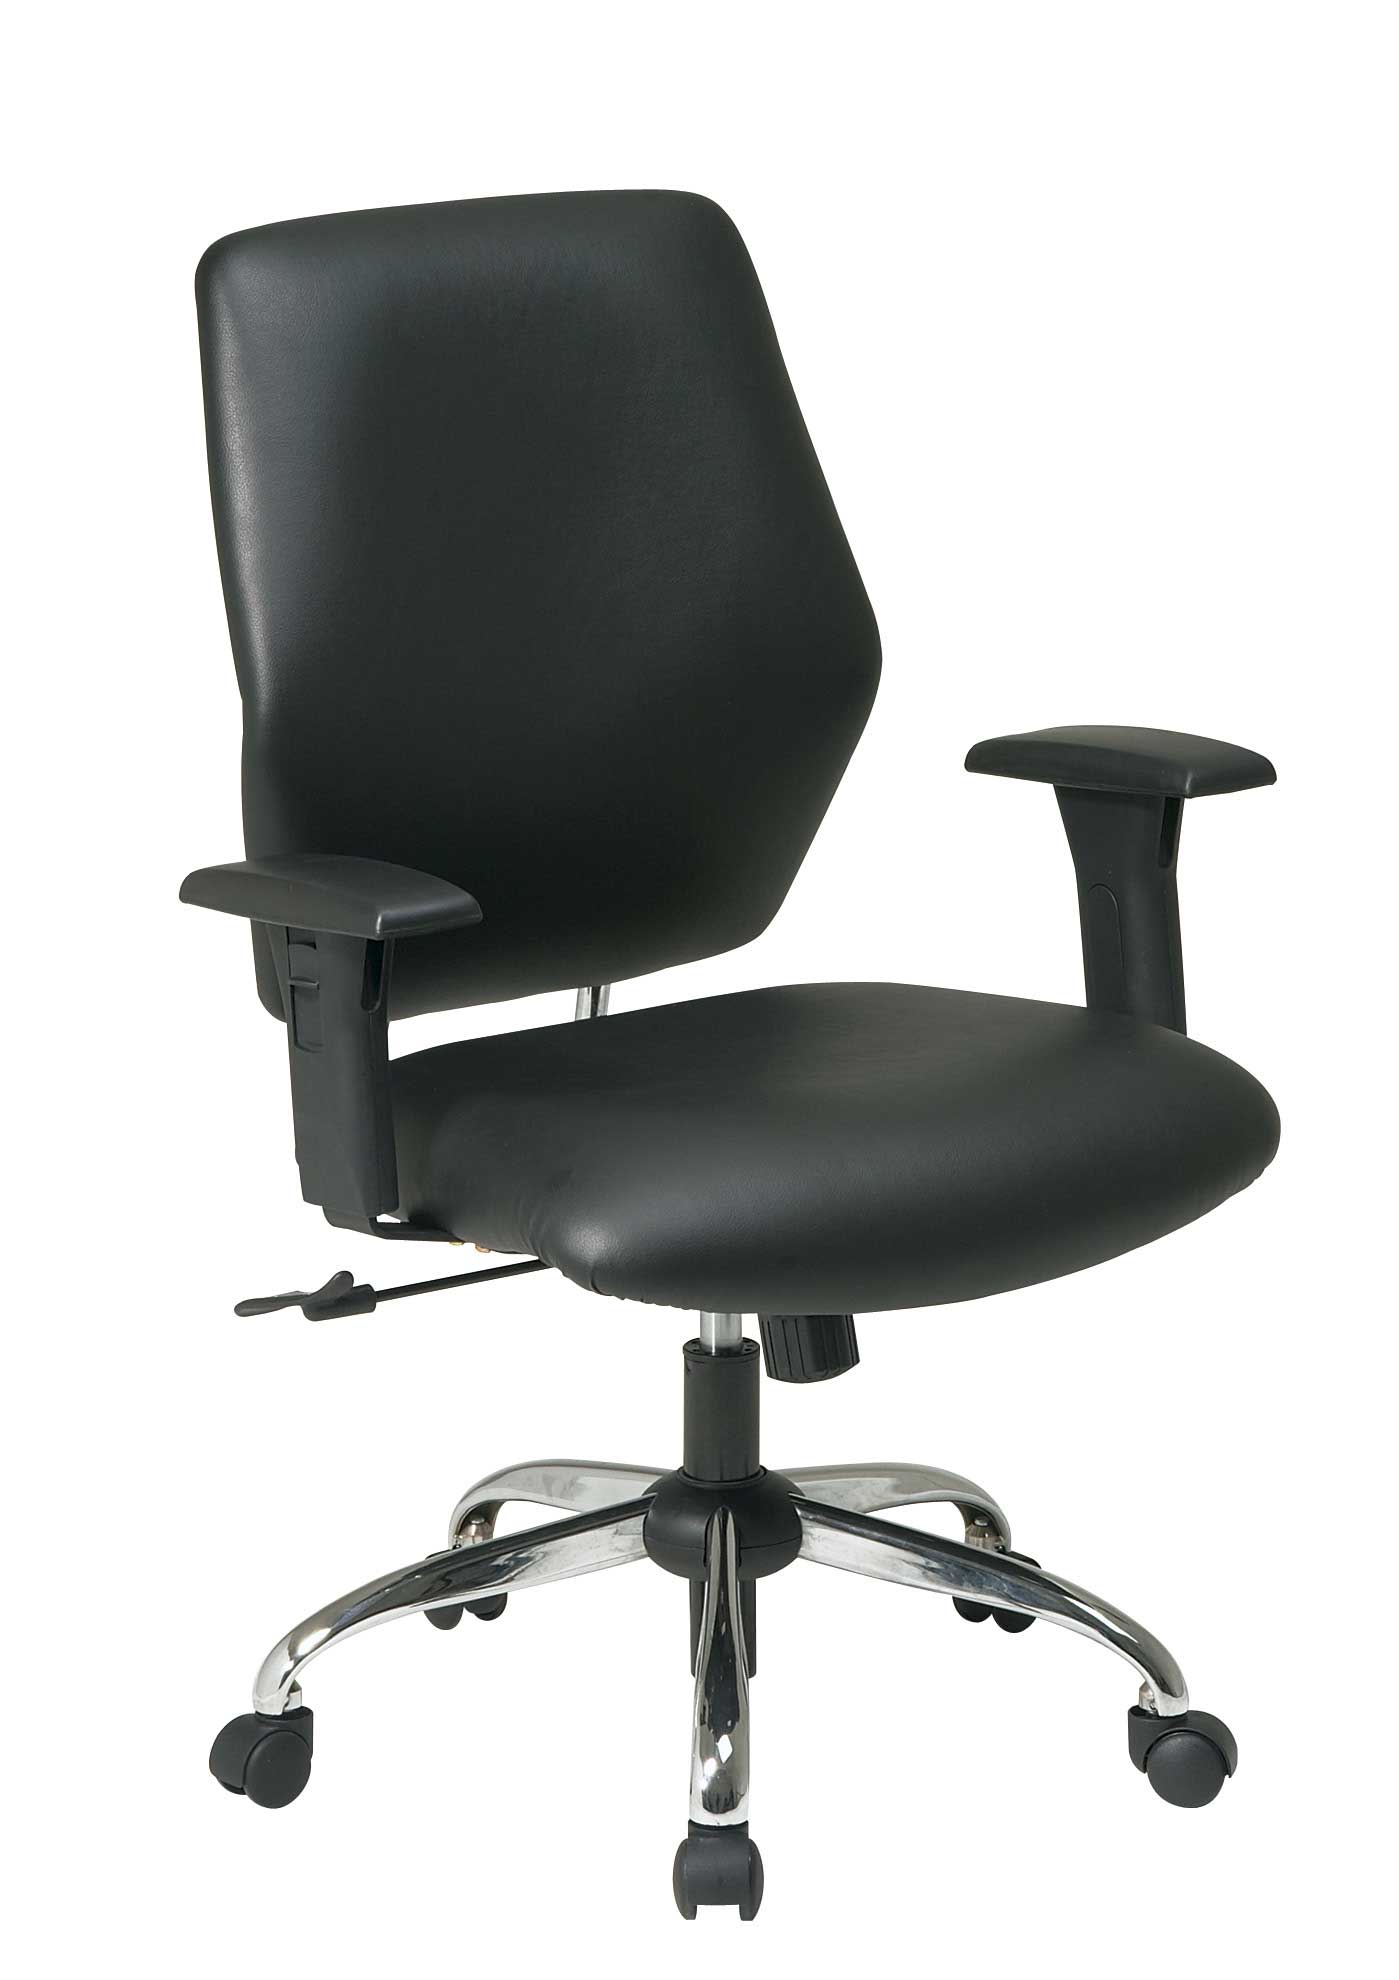 Office chair clipart 